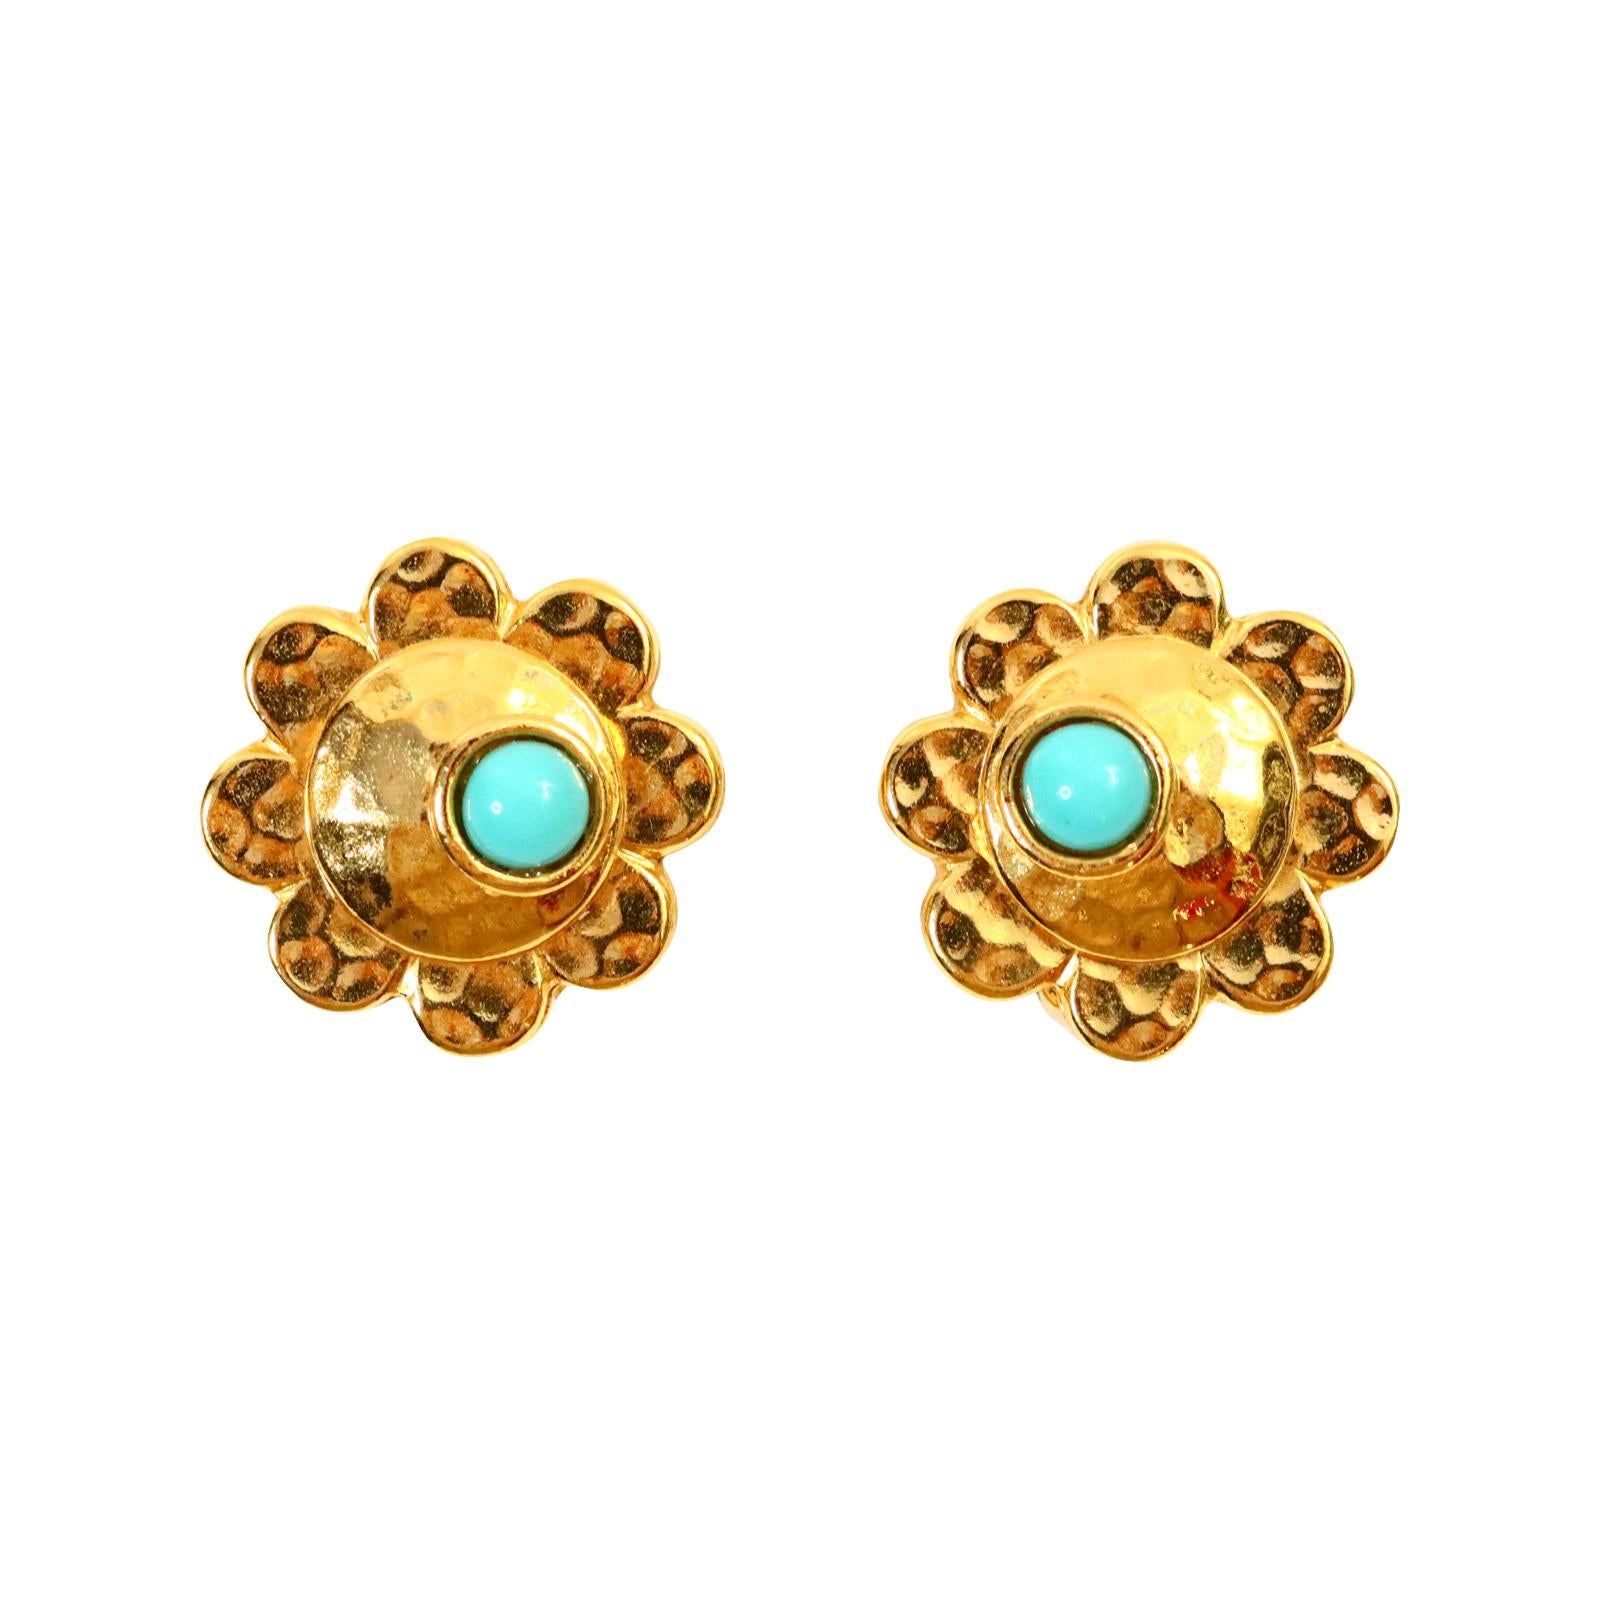 Vintage Carita Paris Gold with Faux Turquoise Earrings Circa 1980s.  Classic and Chic earrings that go with most things and yes you can wear them in the winter. Clip on.

Bracelet to match on site!